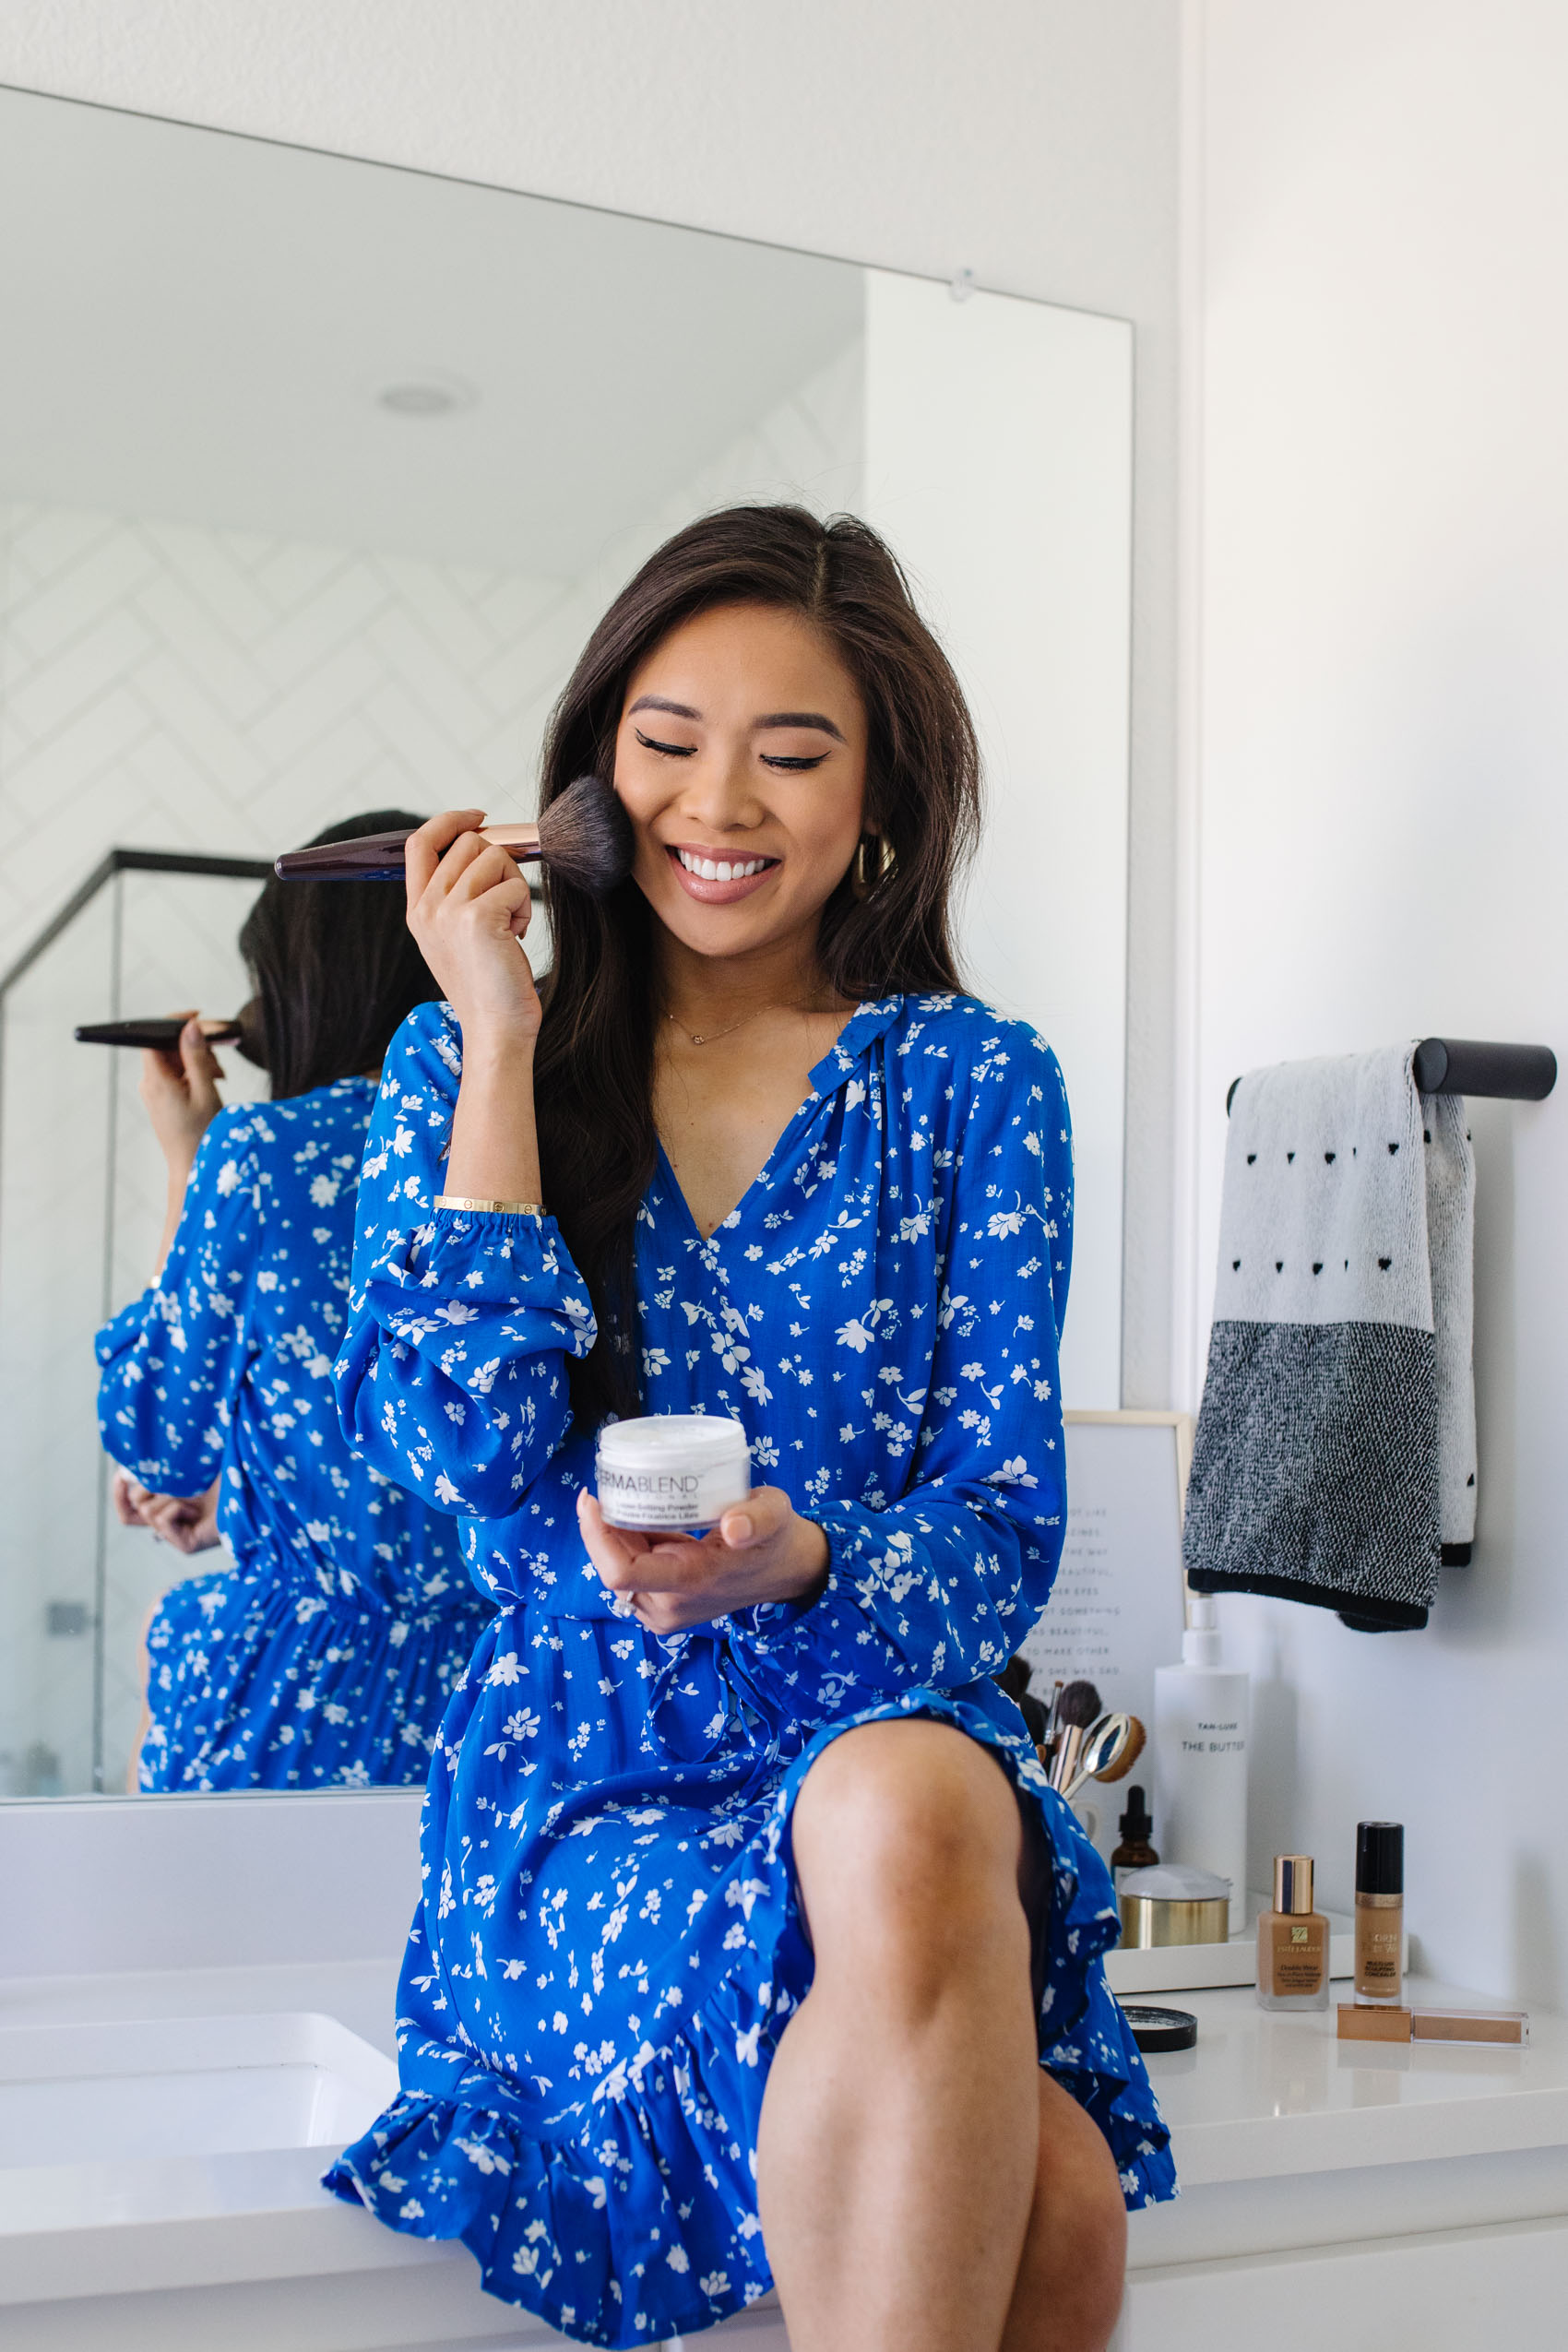 Blogger Hoang-Kim applies Dermablend loose setting powder to set her makeup in her bathroom wearing a Draper James floral dress